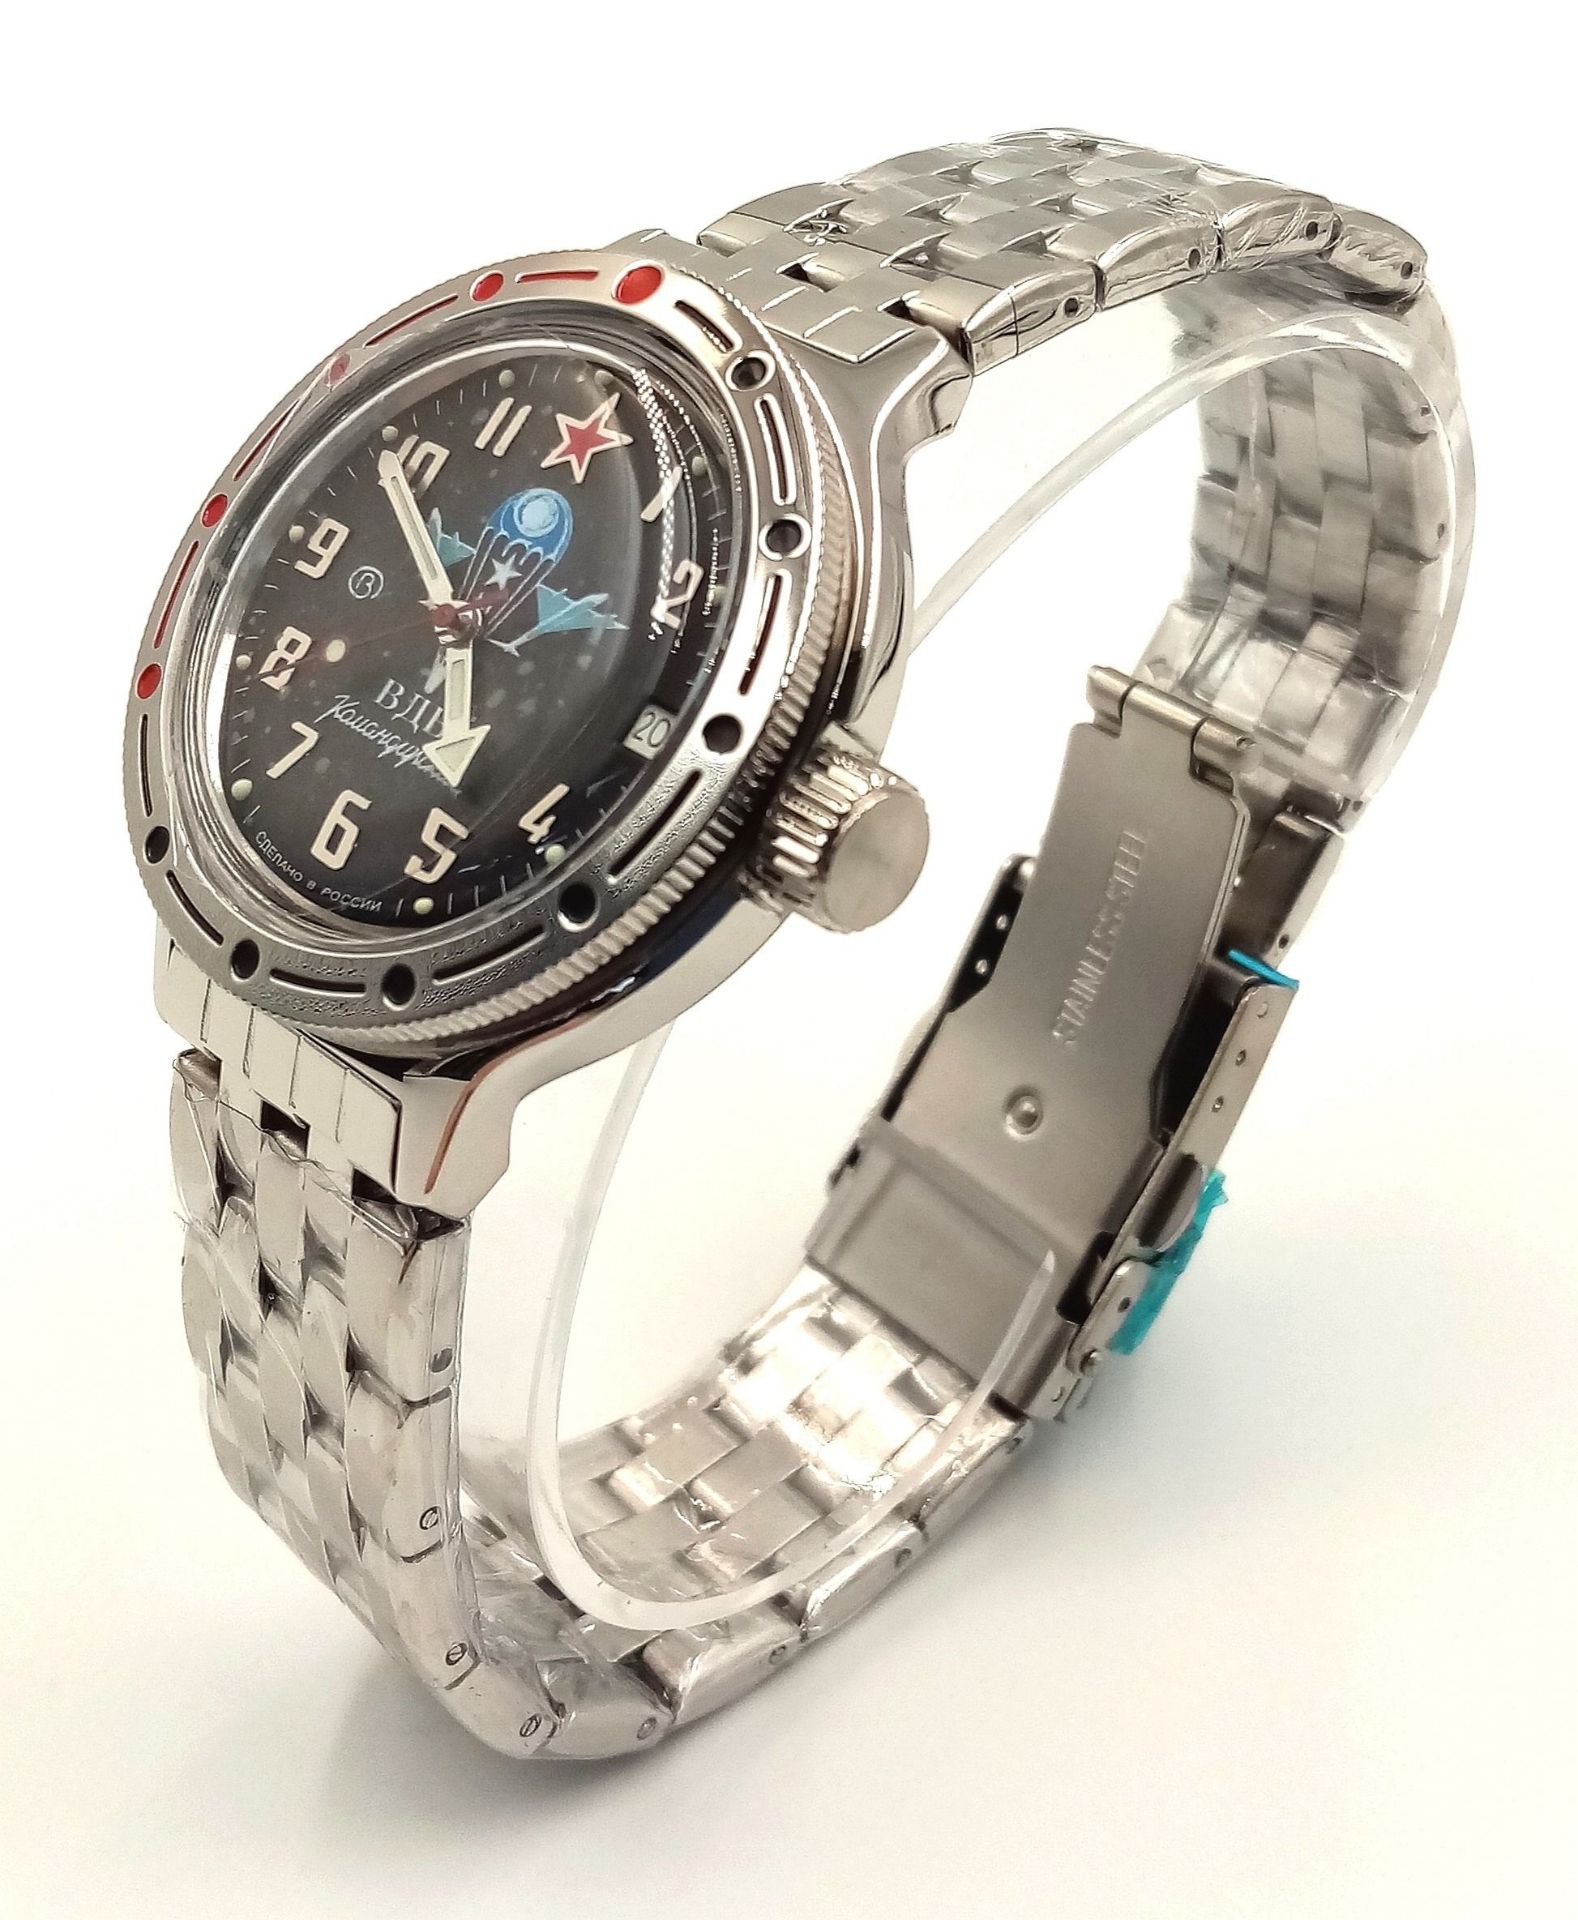 A Vostok Manual Gents Watch. Stainless steel bracelet and case - 40mm. Black dial with date - Image 2 of 6